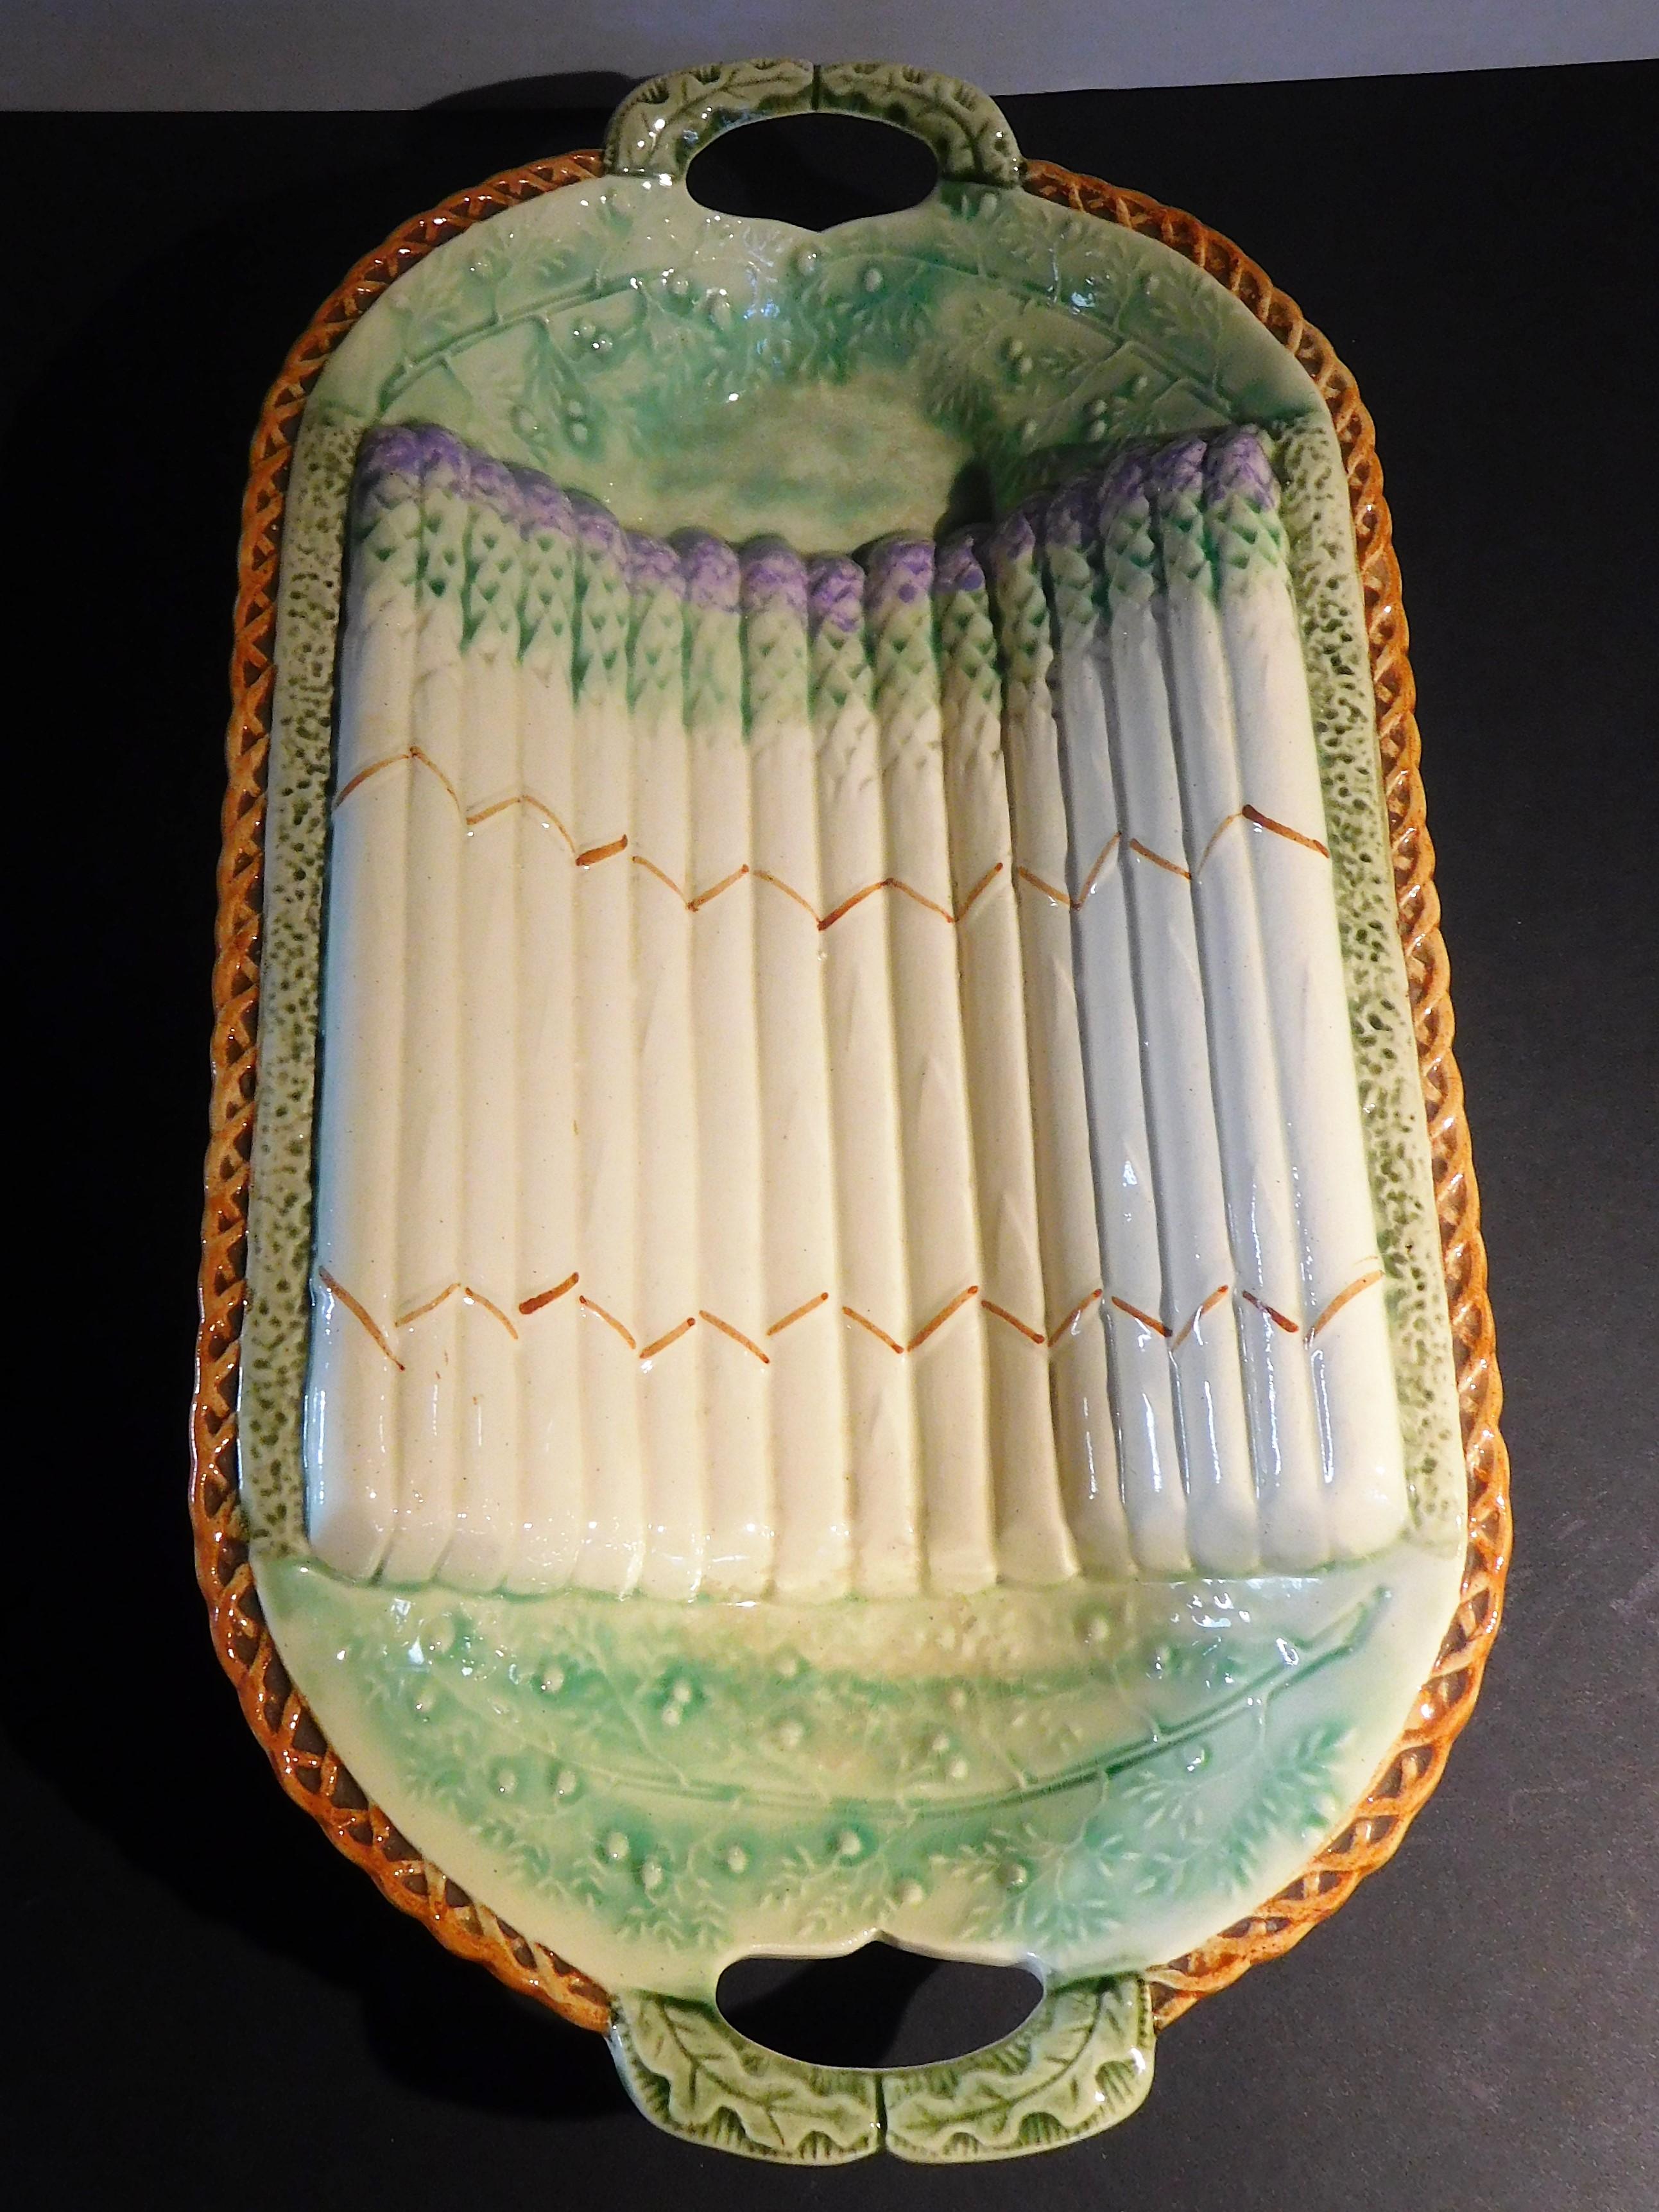 Late 19th Century English Majolica Asparagus Cradle, Aesthetic Movement Influence, circa 1885 For Sale